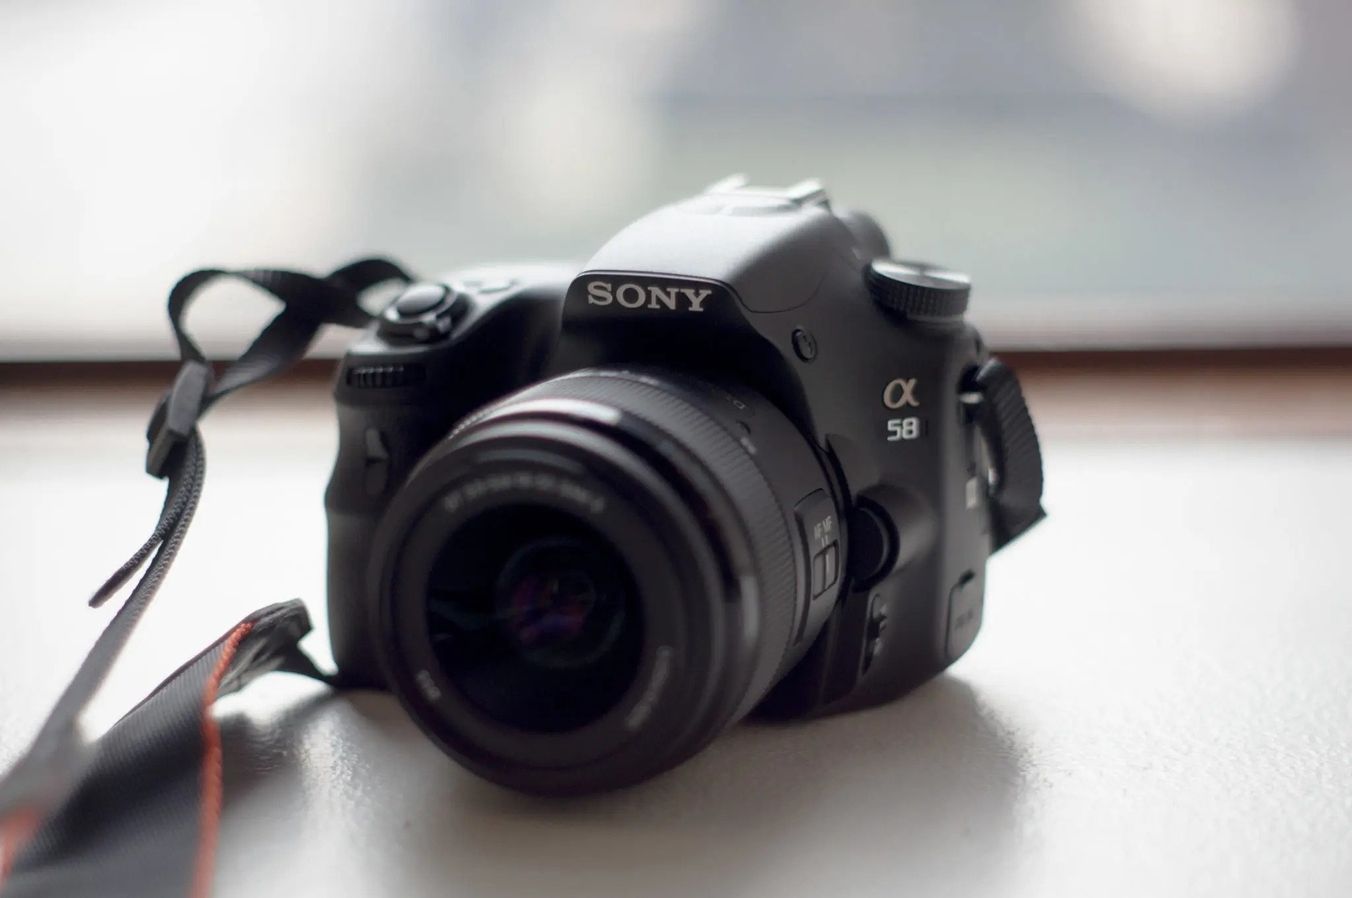 sony alpha a58 camera review features key specs body performance